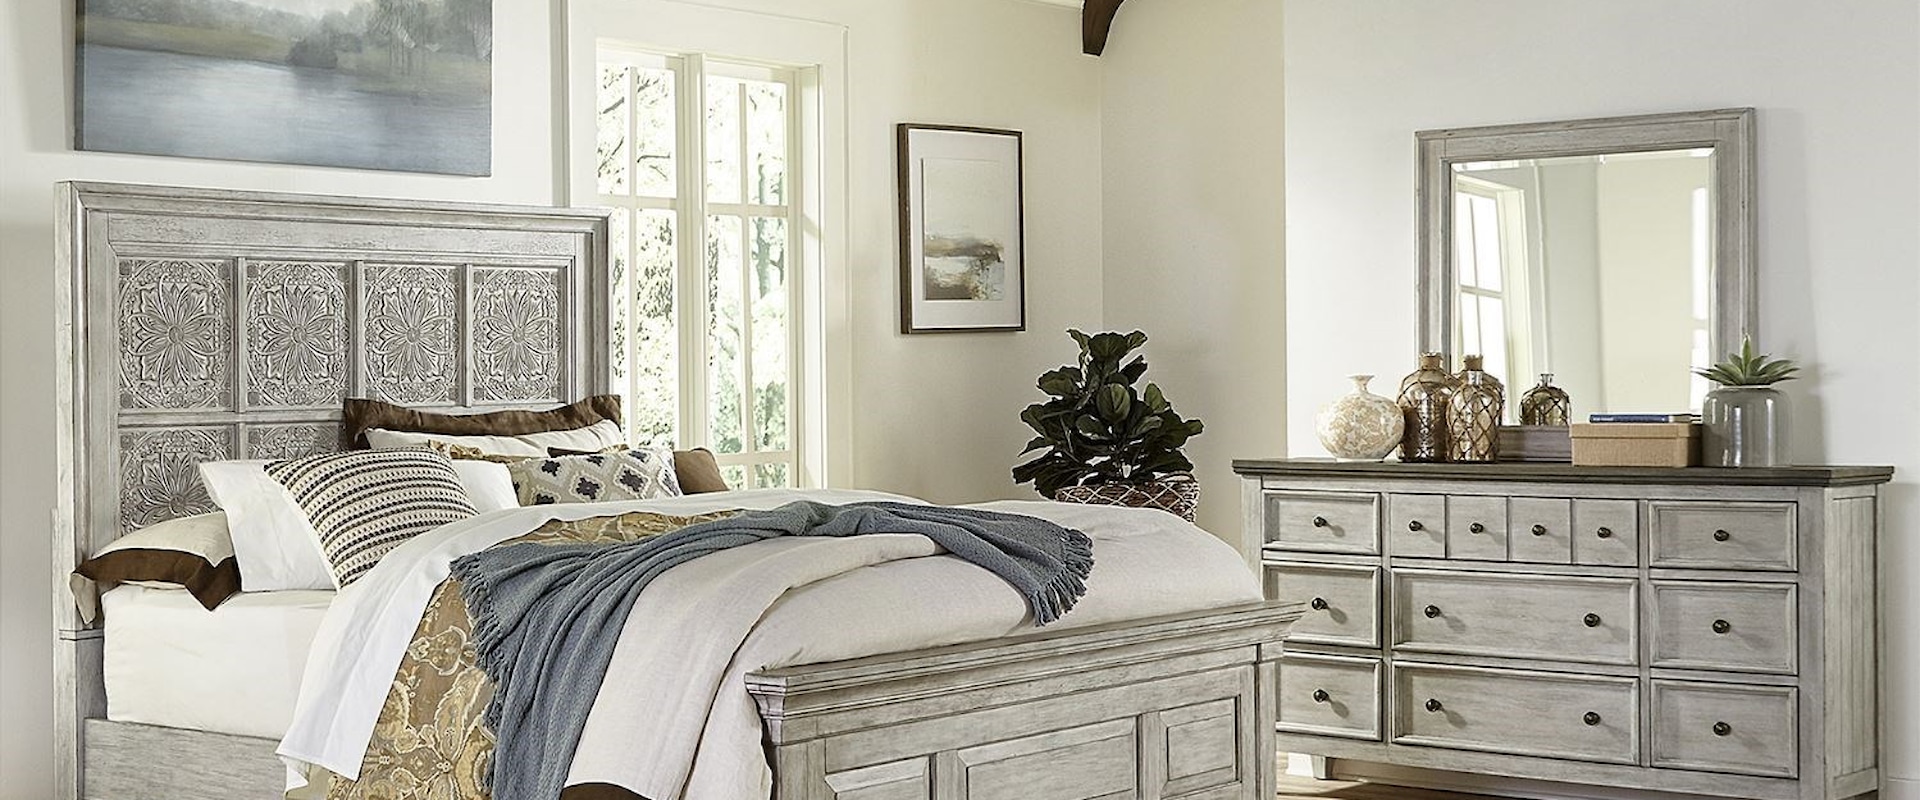 Farmhouse 3-Piece Decorative Queen Panel Bedroom Group with Felt-Lined Drawers